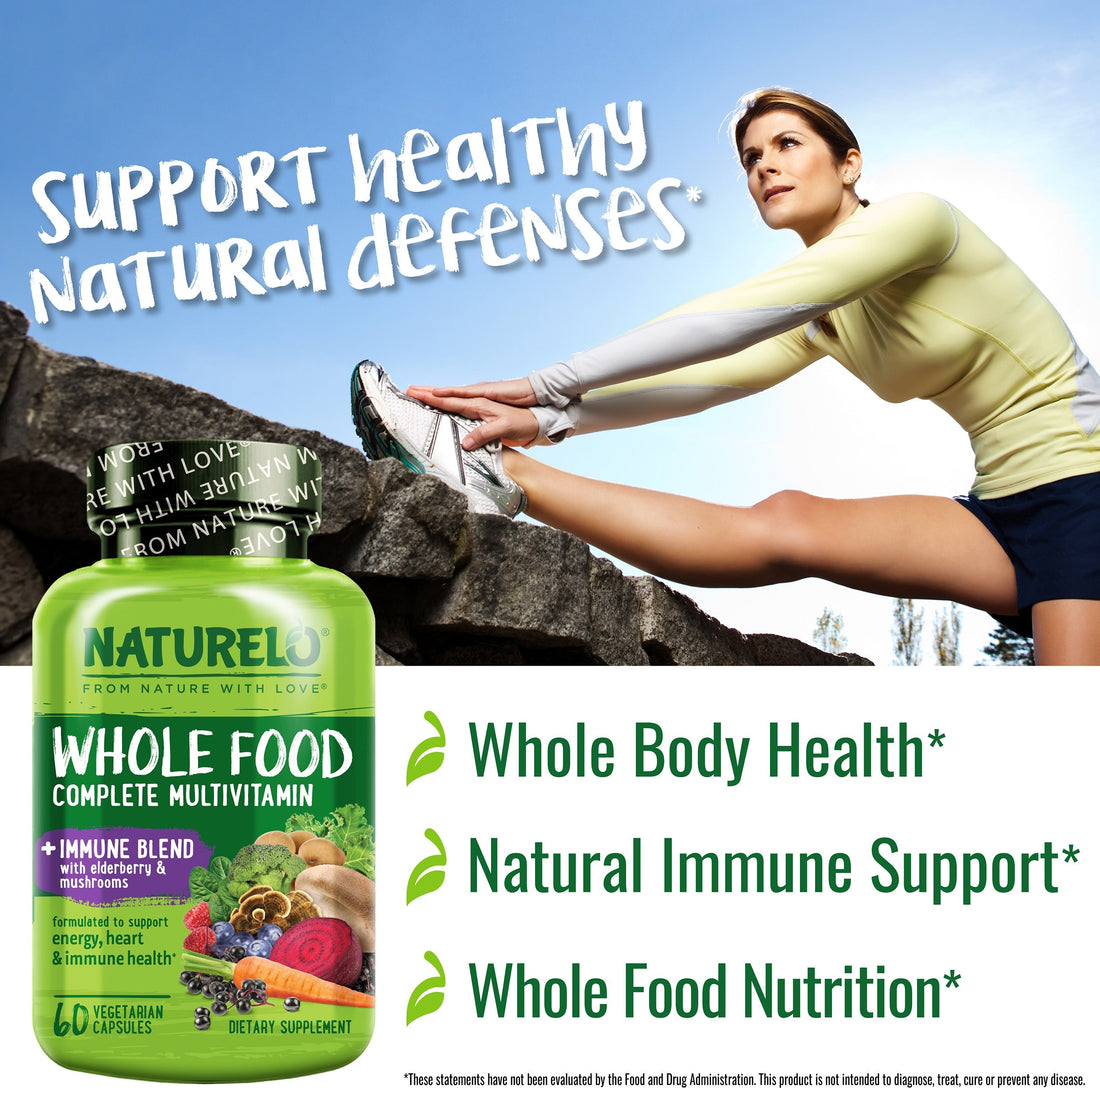 BodyHealth All Natural Vitamins & Supplements